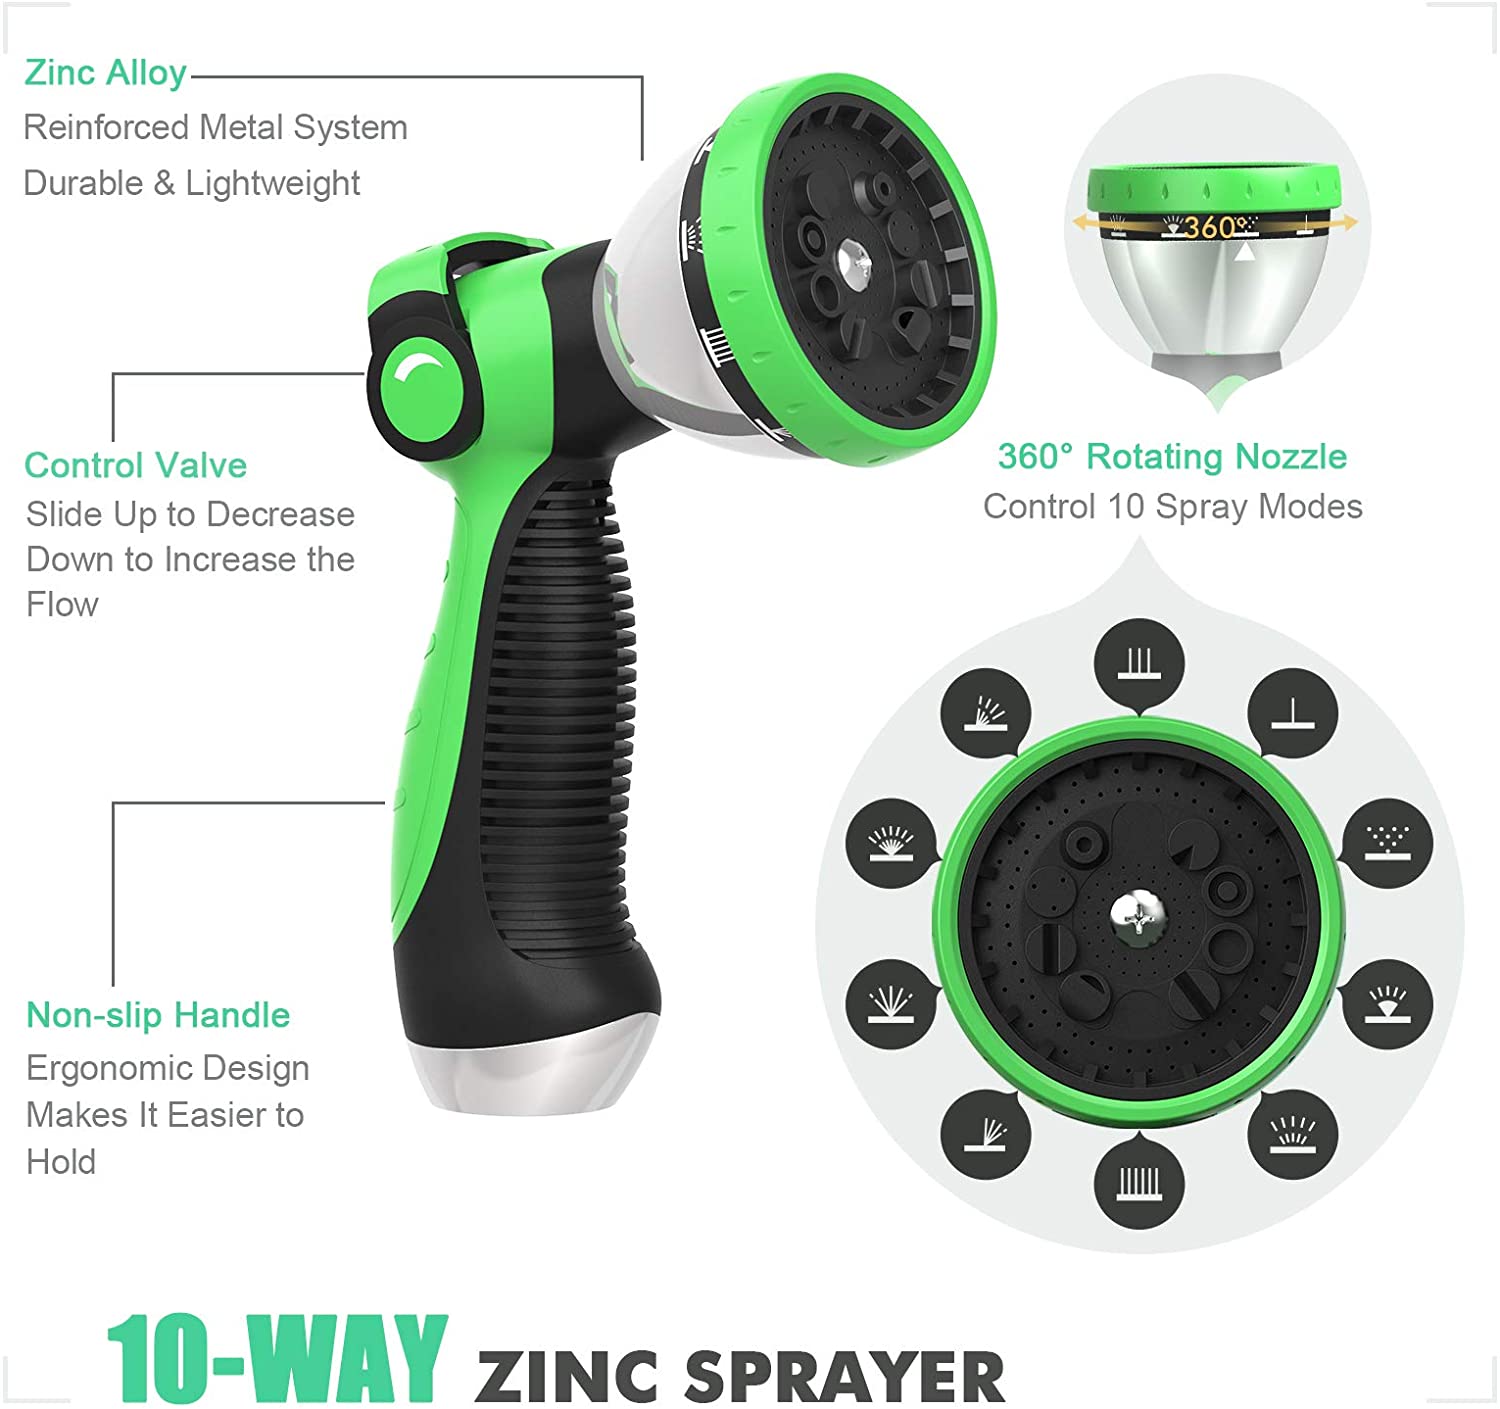 etc. HOMY Garden Hose Nozzle Pet Washing For Watering Thumb Switch Design Heavy Duty and High Pressure Water Nozzle with 10 Spray Patterns Easy Way to Control Water Car washing 